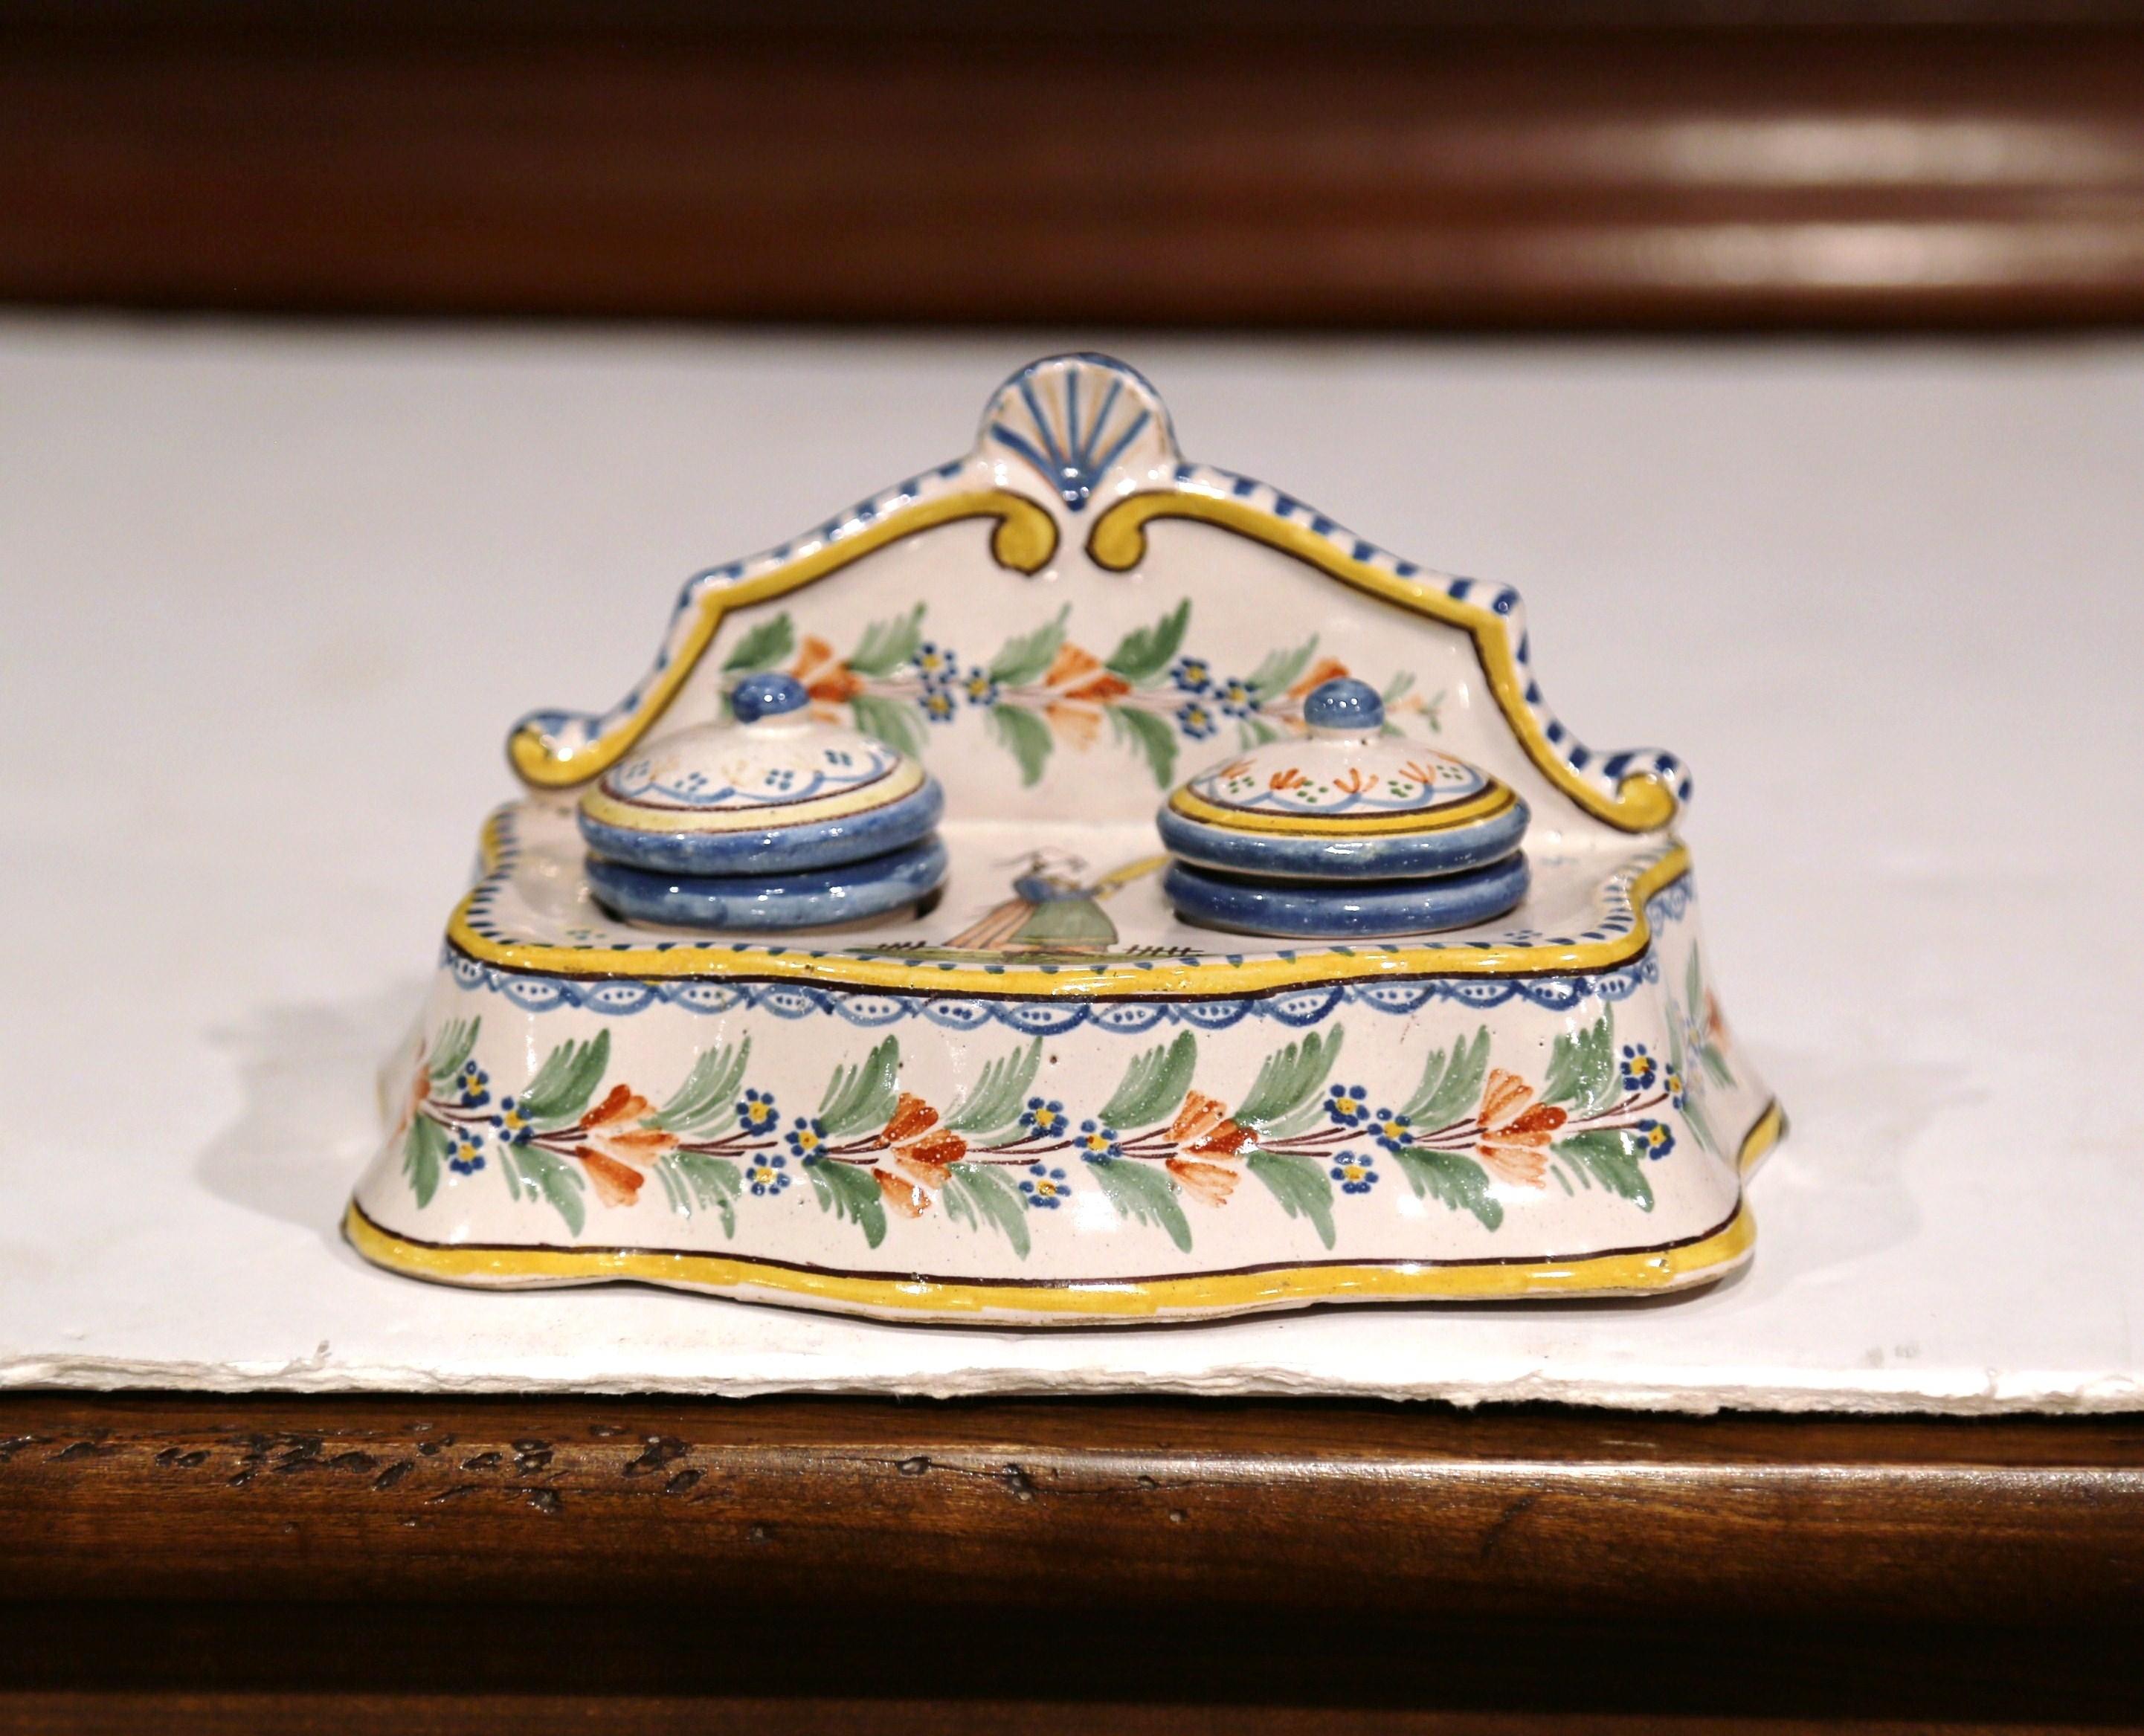 Decorate a lady's writing desk with this colorful antique inkwell from Brittany. Crafted in western France circa 1904-1922, the elegant piece has its original ink containers and matching lids. The porcelain piece is hand painted with a traditional